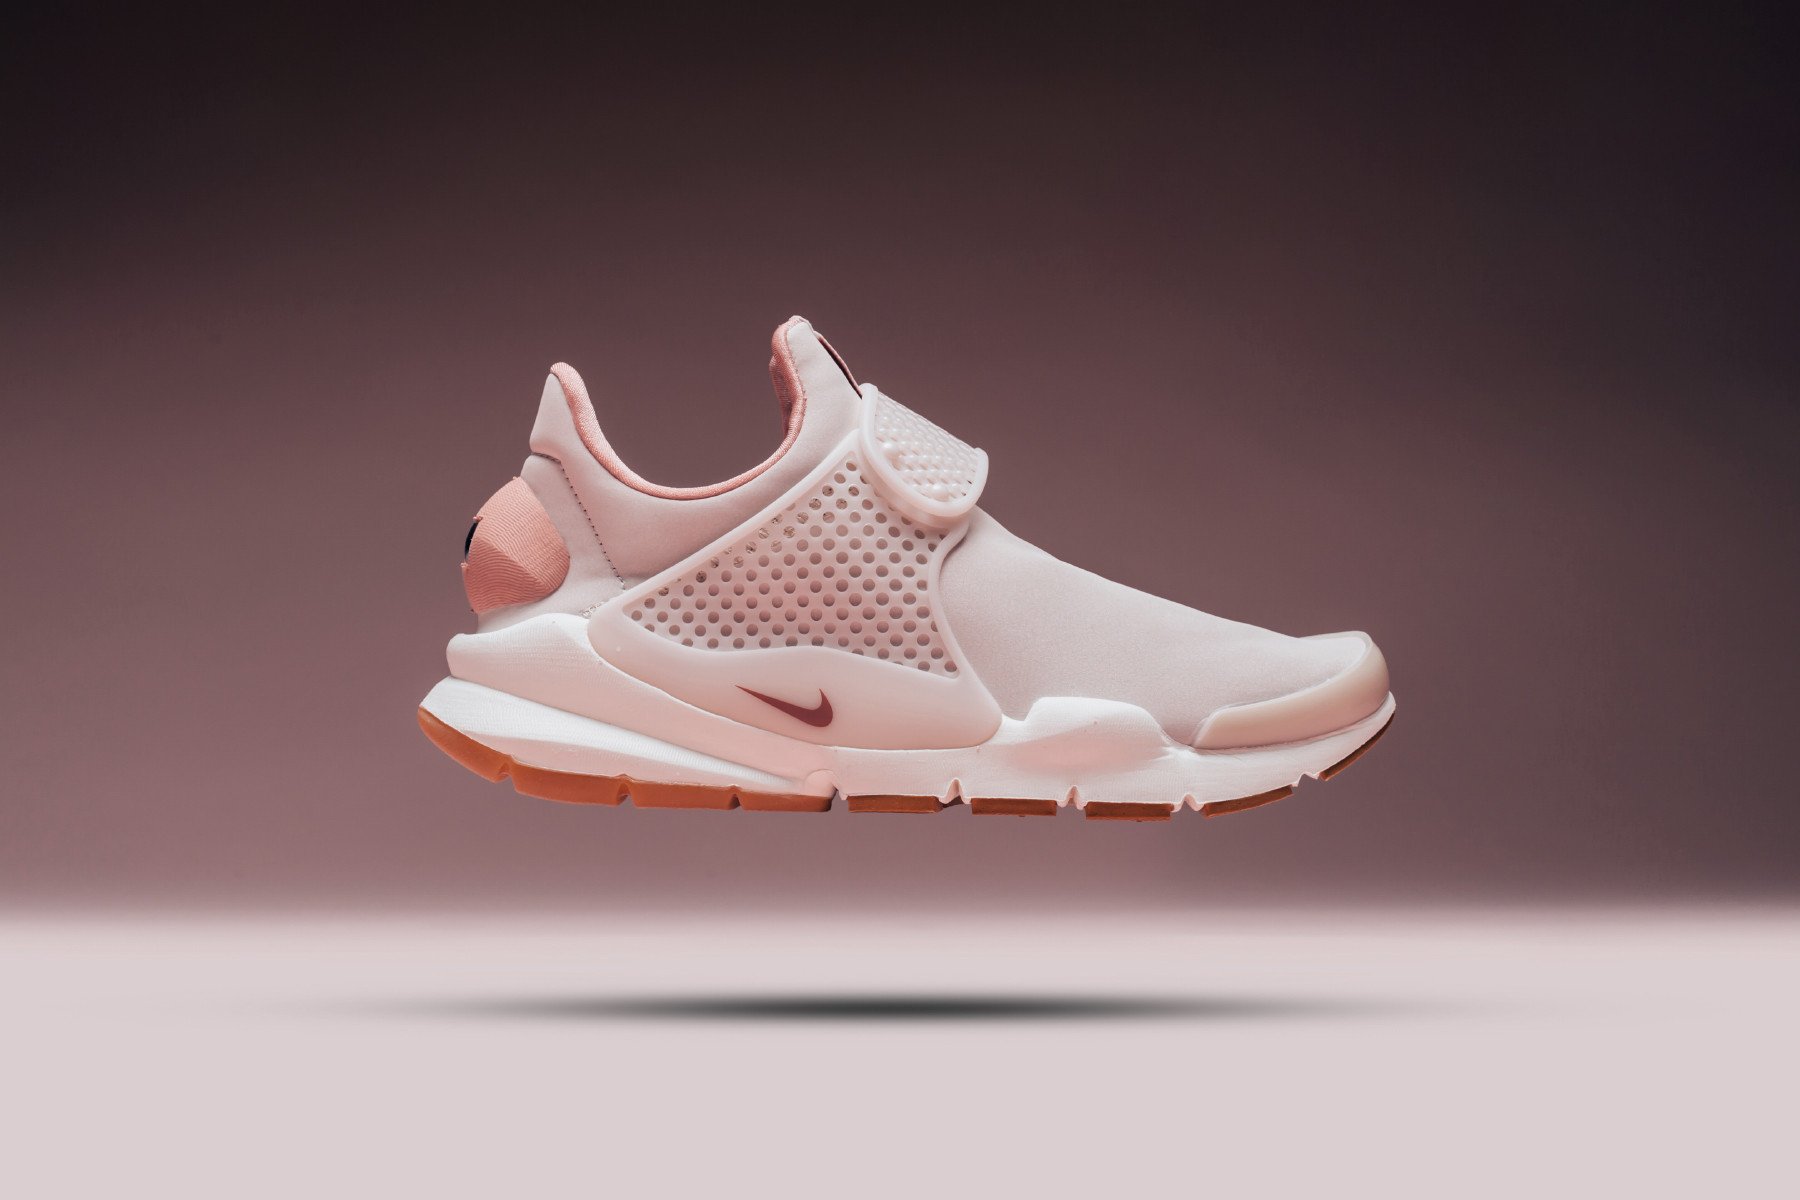 Nike Women's Sock Dart Premium in Silt Available Feature